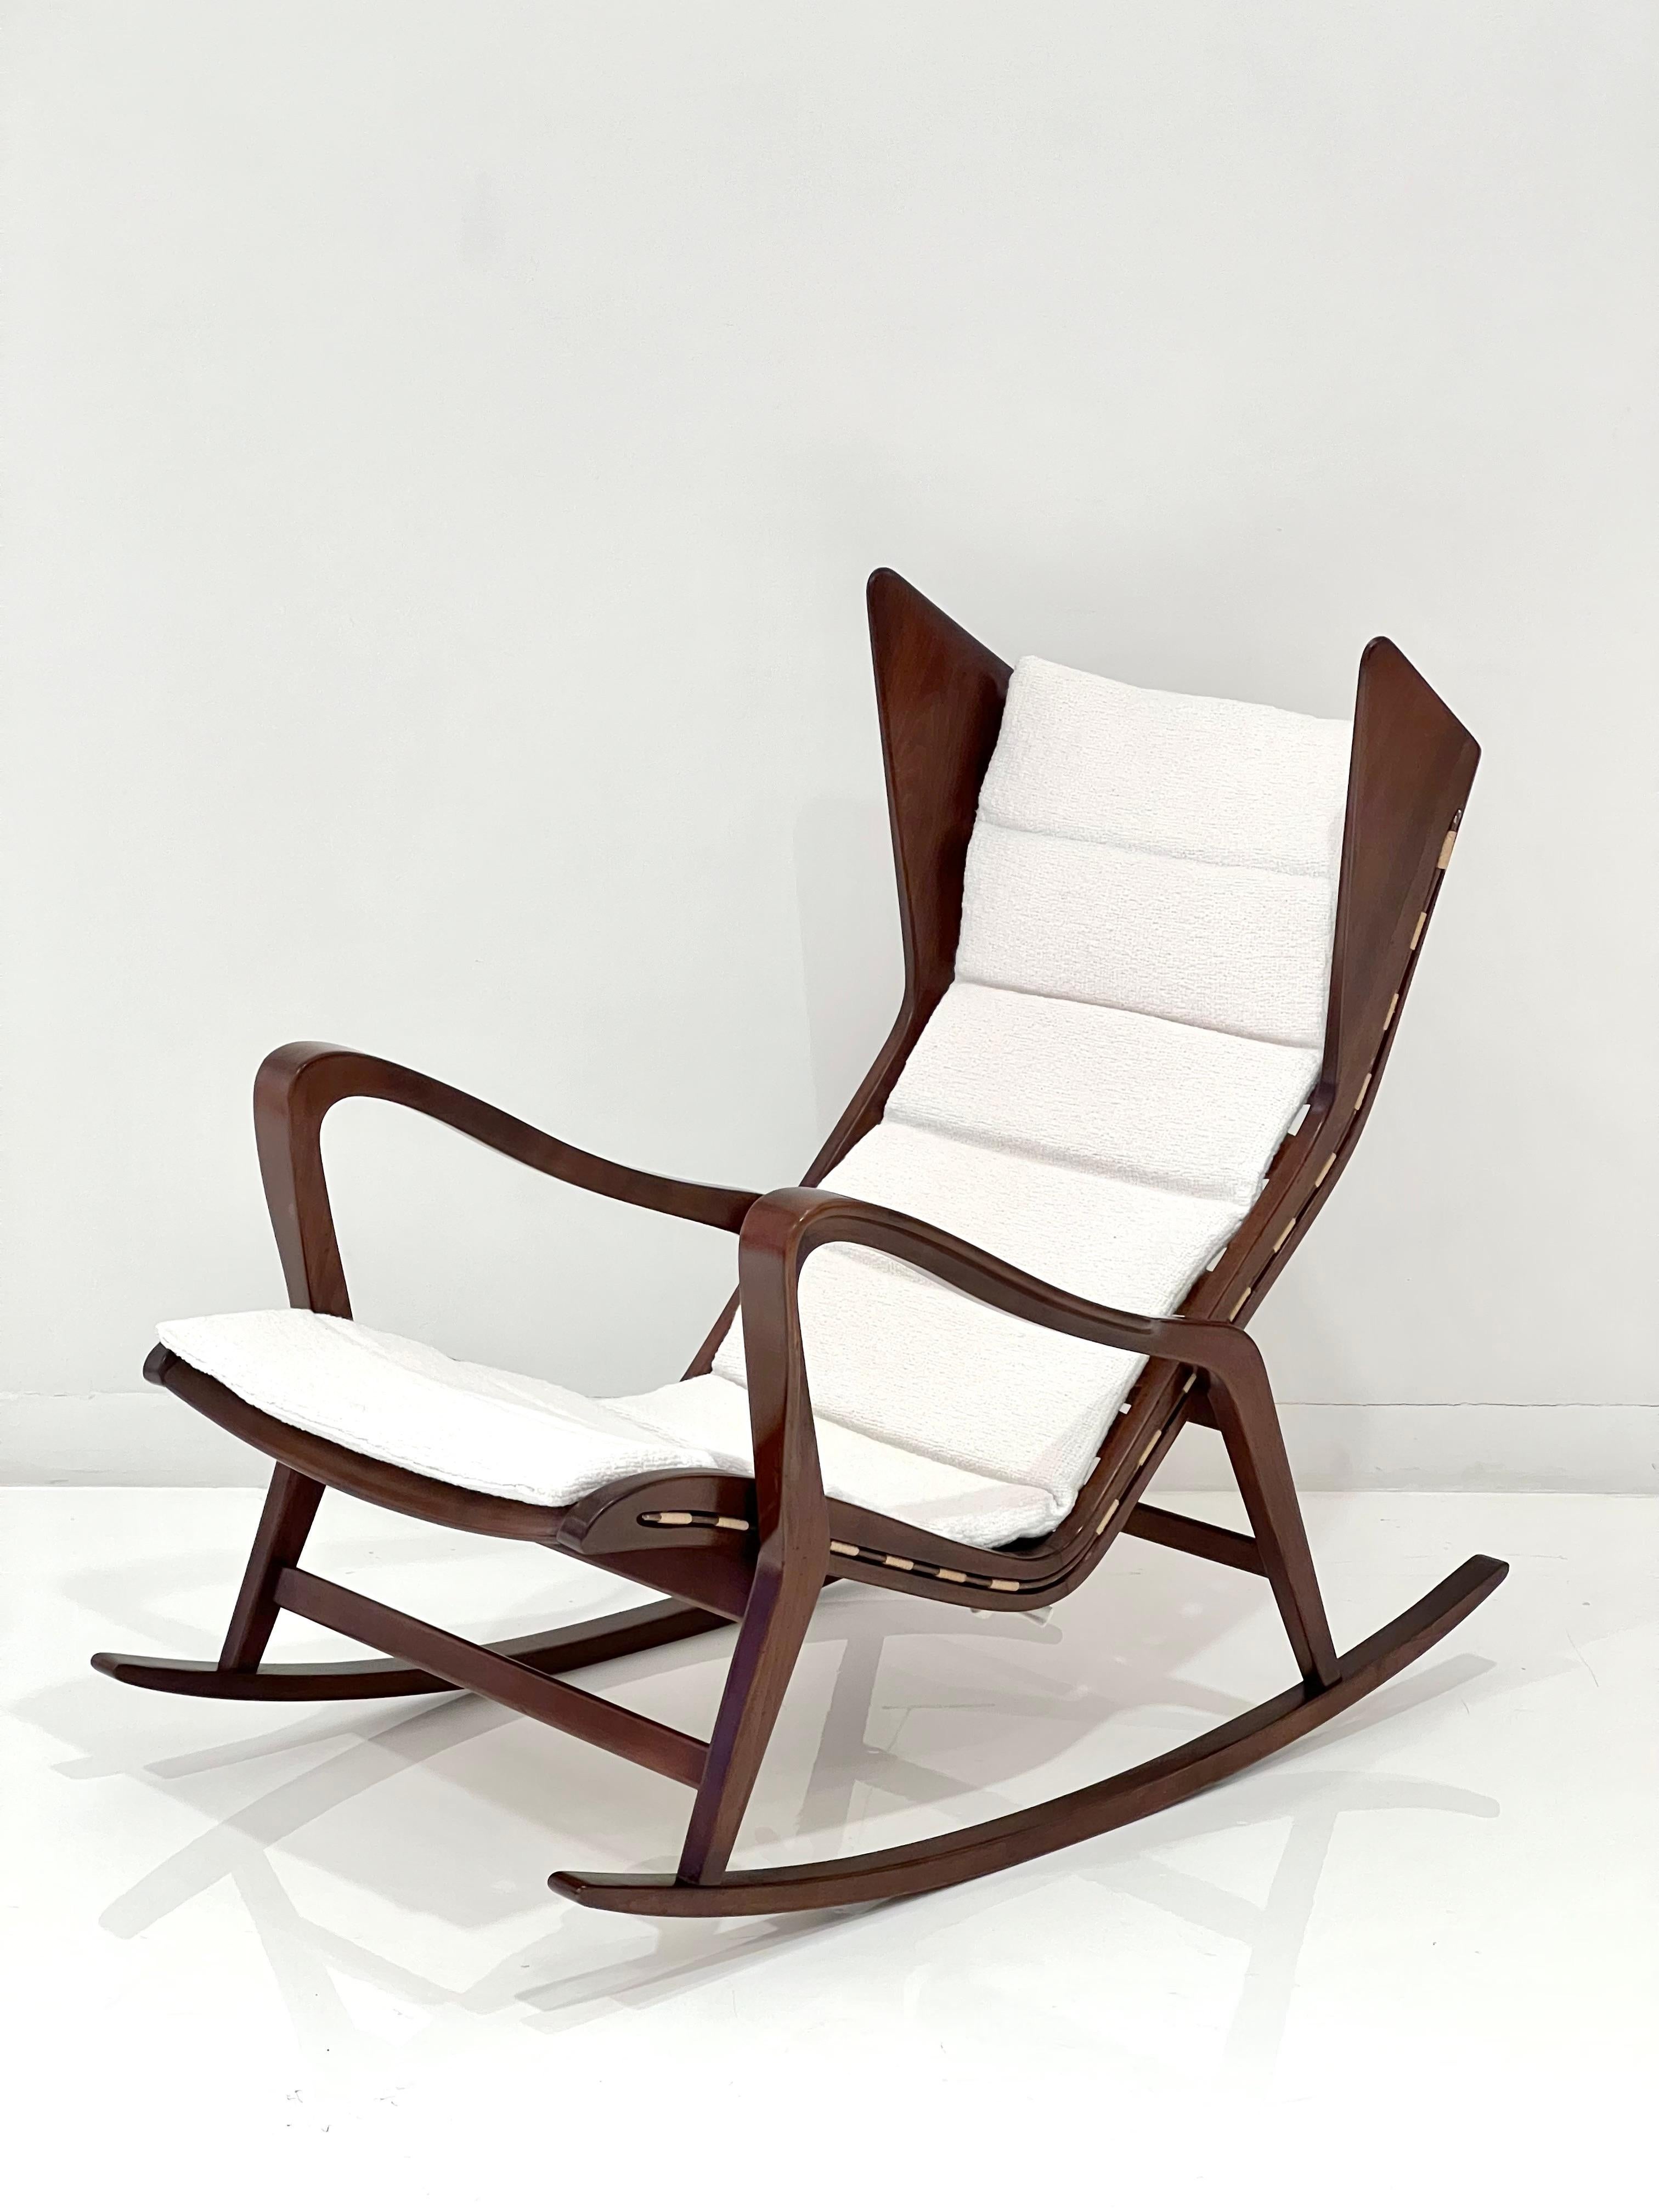 Walnut Rocking Chair in the style of Gio Ponti, manufactured by Cassina. Italy, 1960s.
Newly reupholstered with original channeled style cushion.